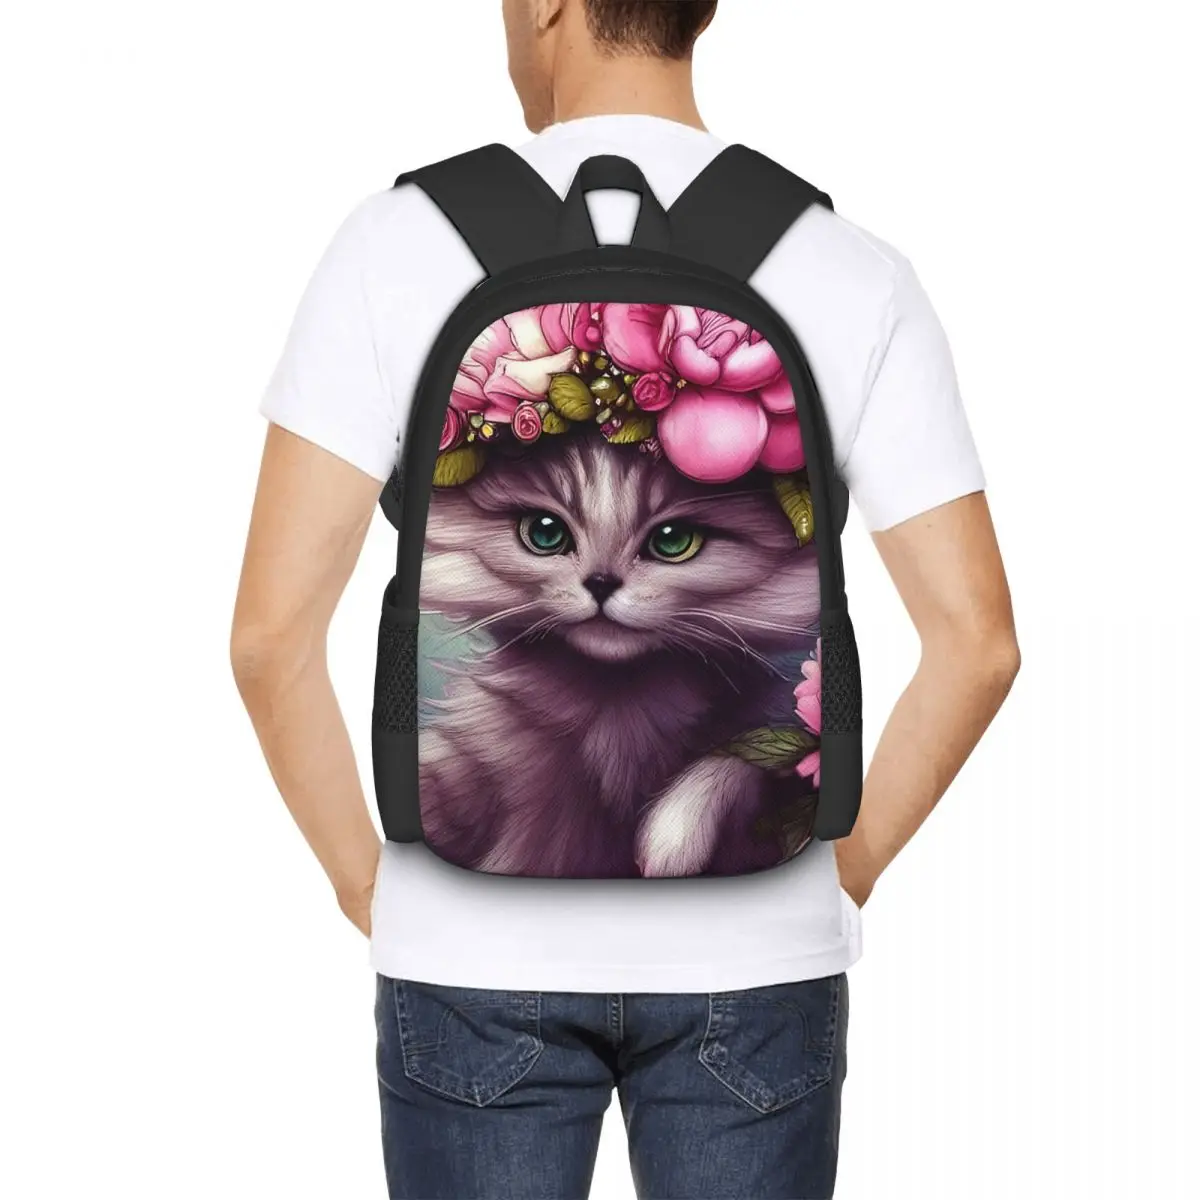 Oddly Cute Creatures - If Looks Could Kill Cat Backpack for Girls Boys Travel RucksackBackpacks for Teenage school bag